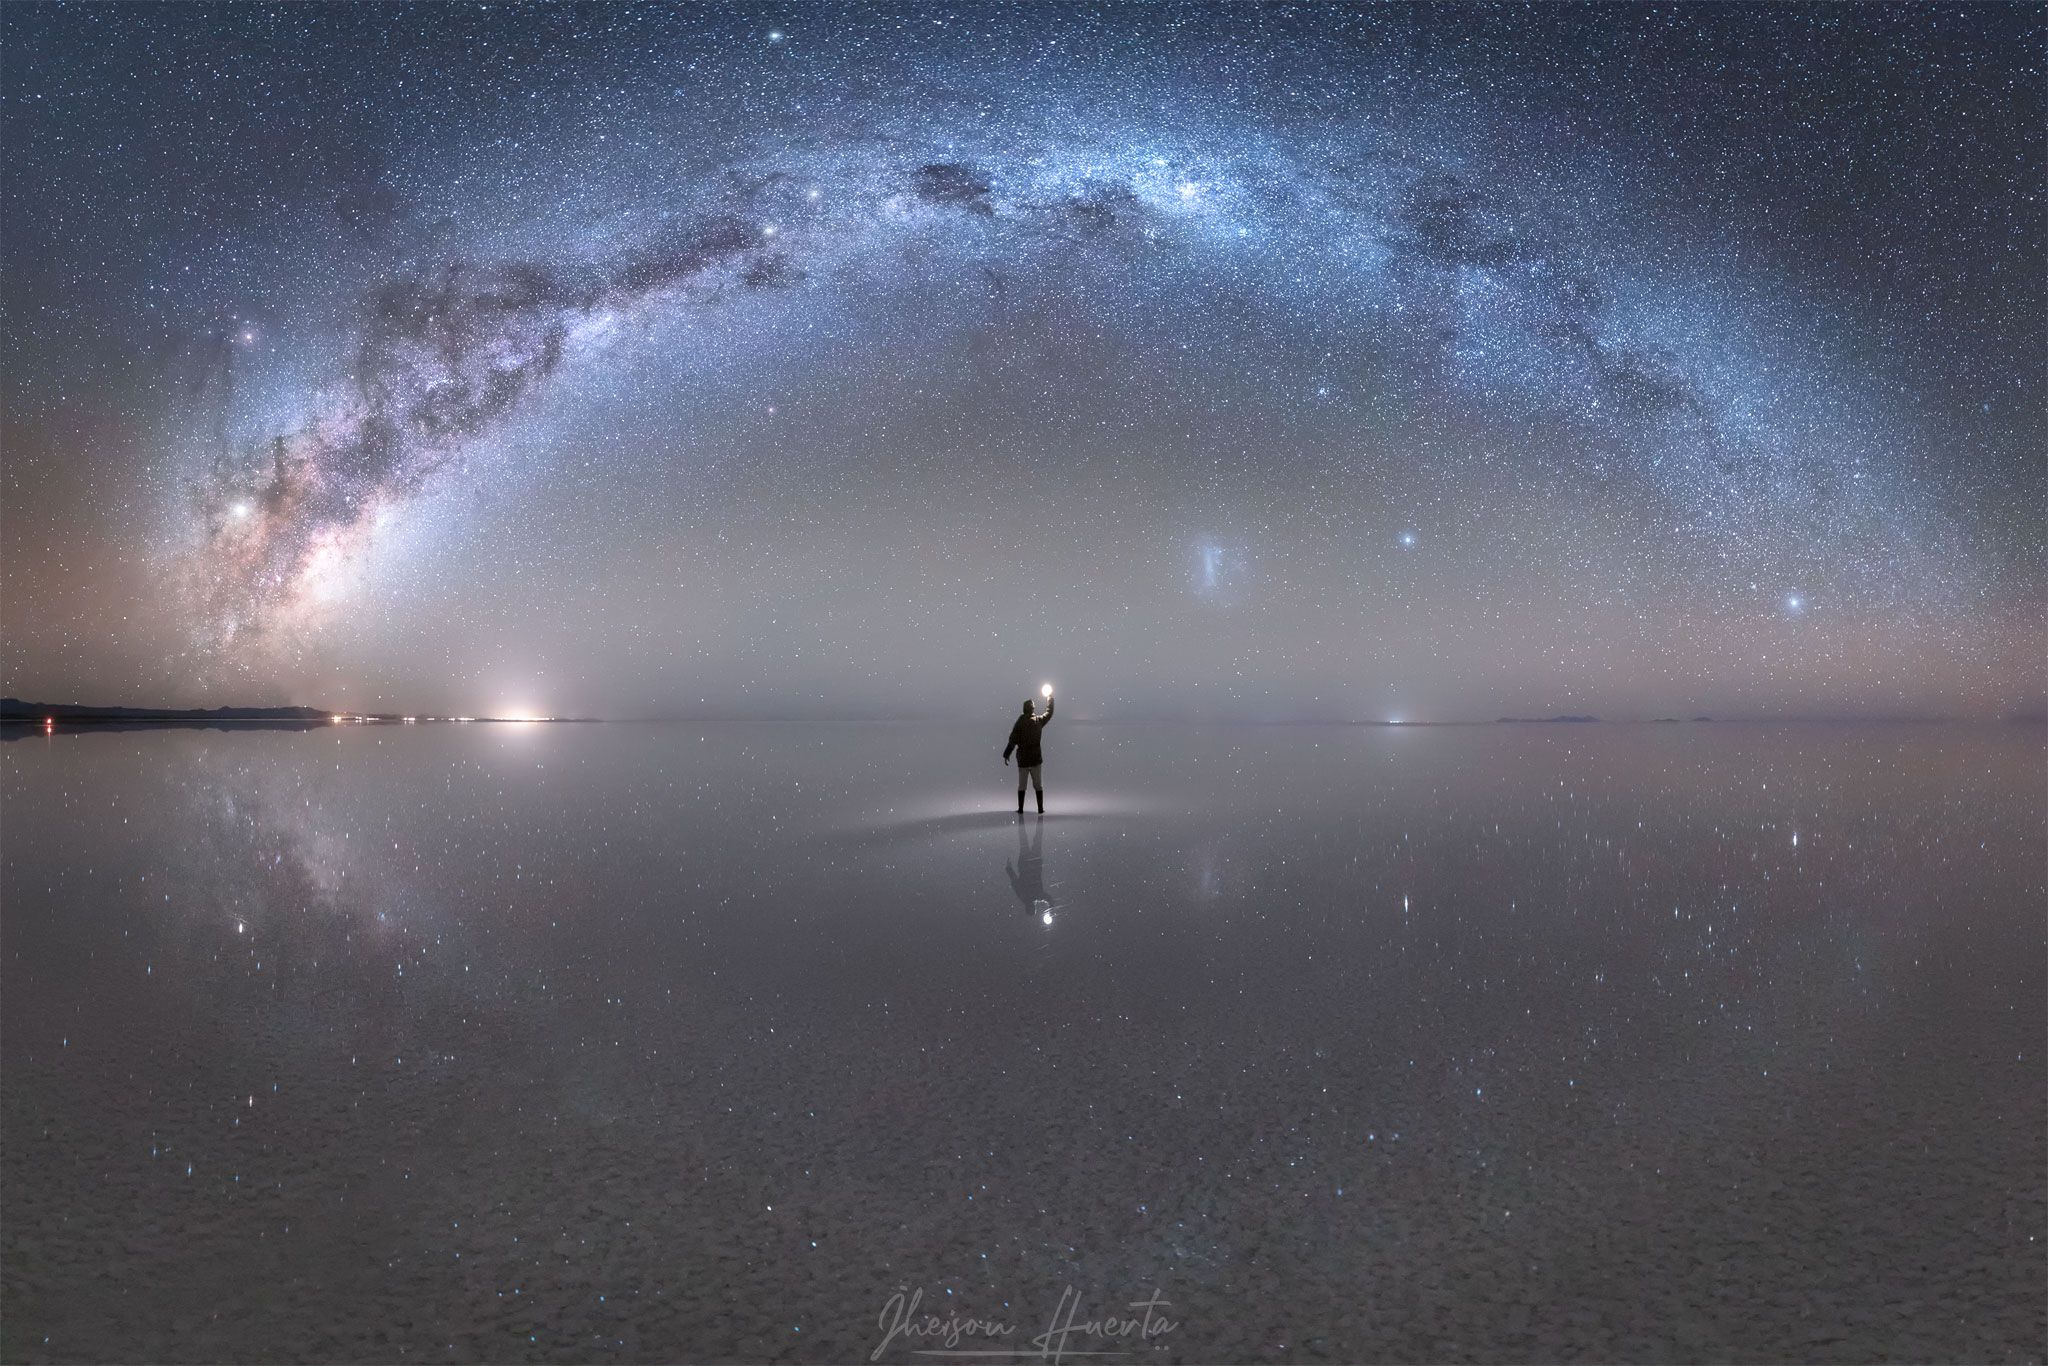  Night Sky Reflections from the World's Largest Mirror 